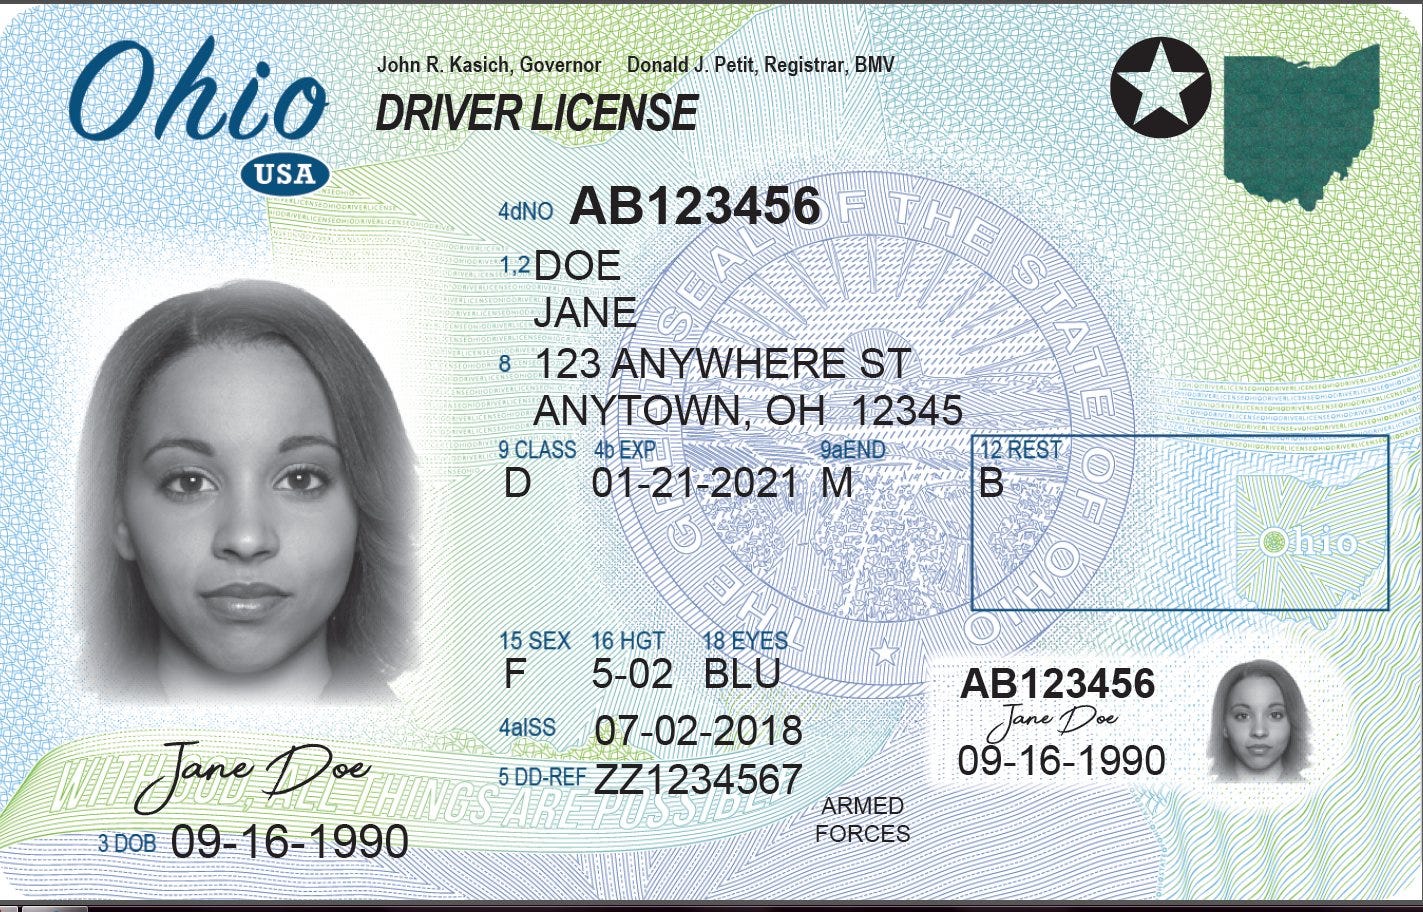 Ohio Drivers License Number Lookup fonew